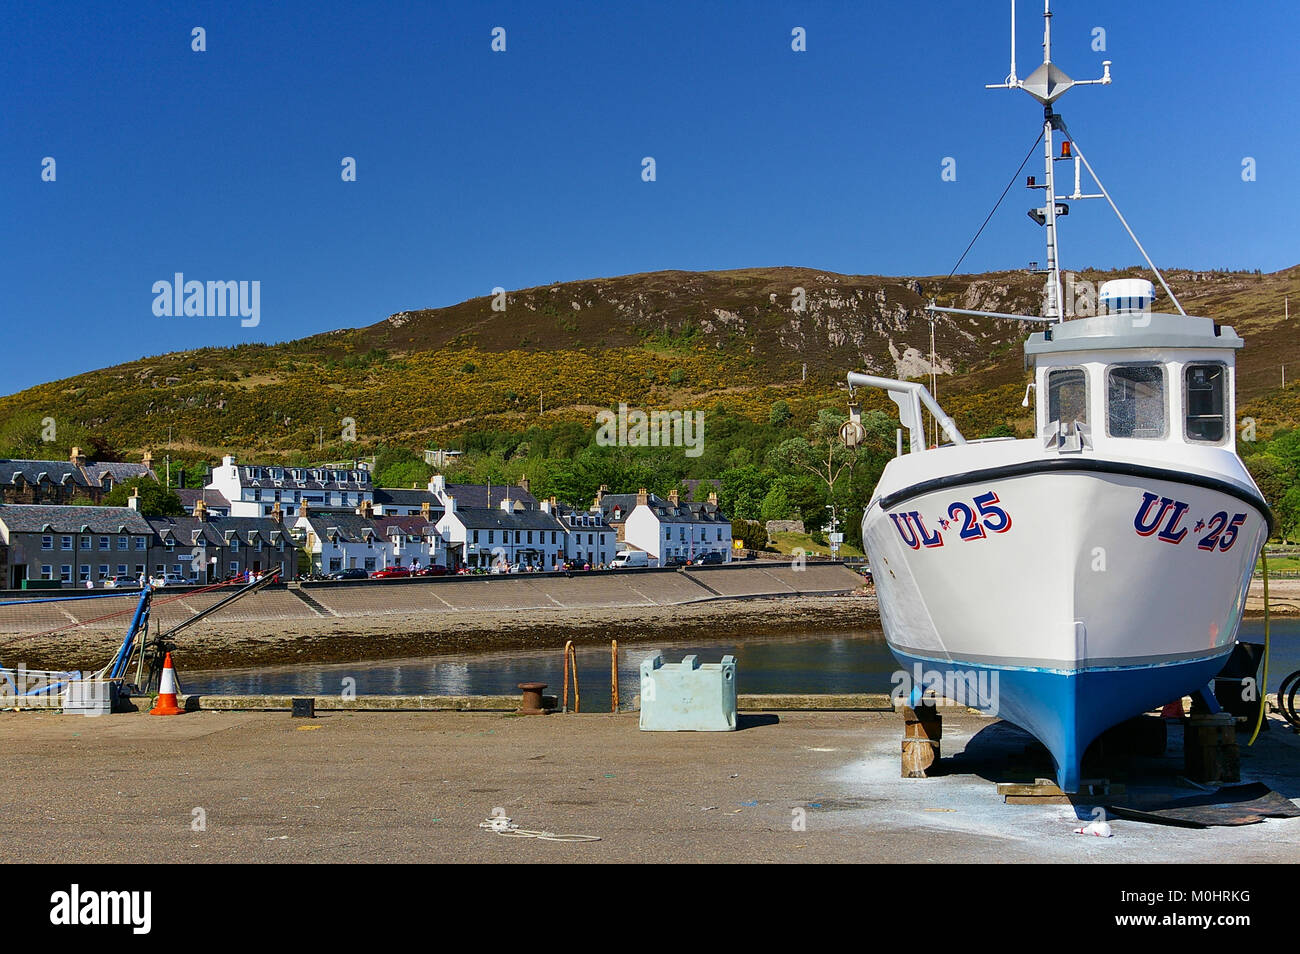 Ullapool, Scotland - May 27th, 2012 - White fishing boat ashore on the pier with harbor, picturesque waterfront buildings and mountain range in the ba Stock Photo